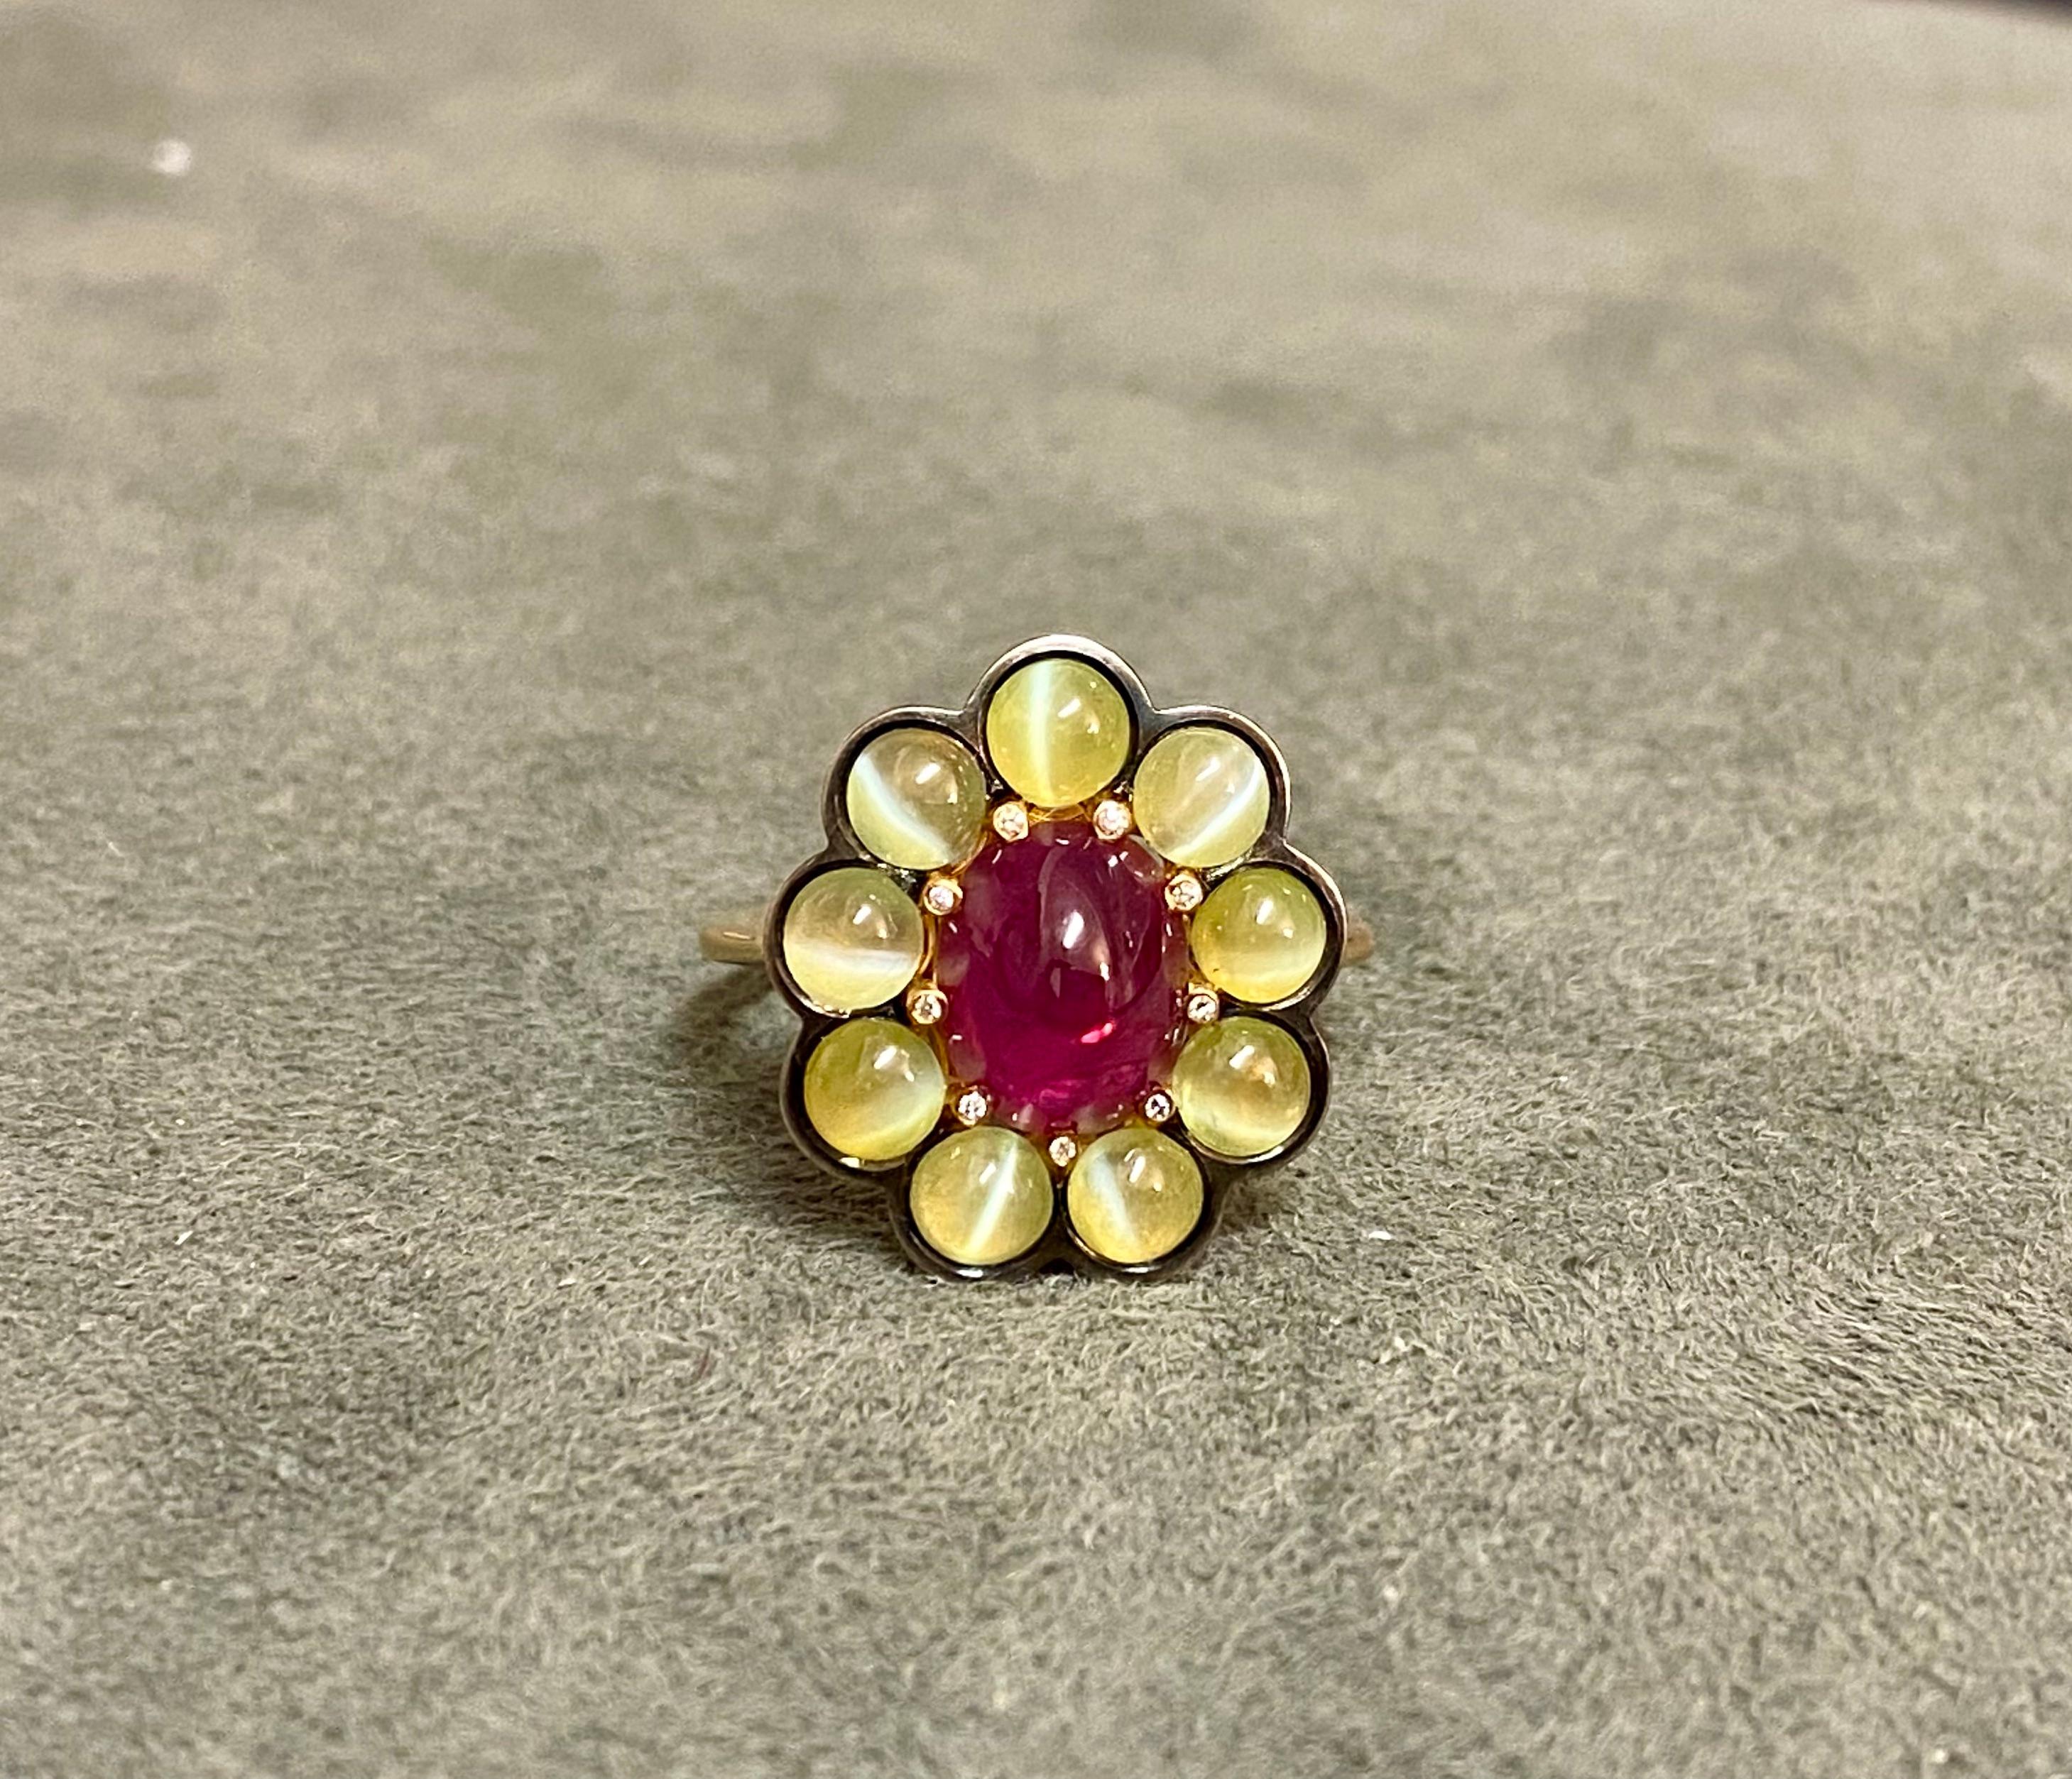 A 2.38ct Ruby set with 9 Cat's Eye Chrysoberyls (3.01ct) in 18k yellow and blackened gold. The 9 claws holding the ruby are set with 9 diamonds. 